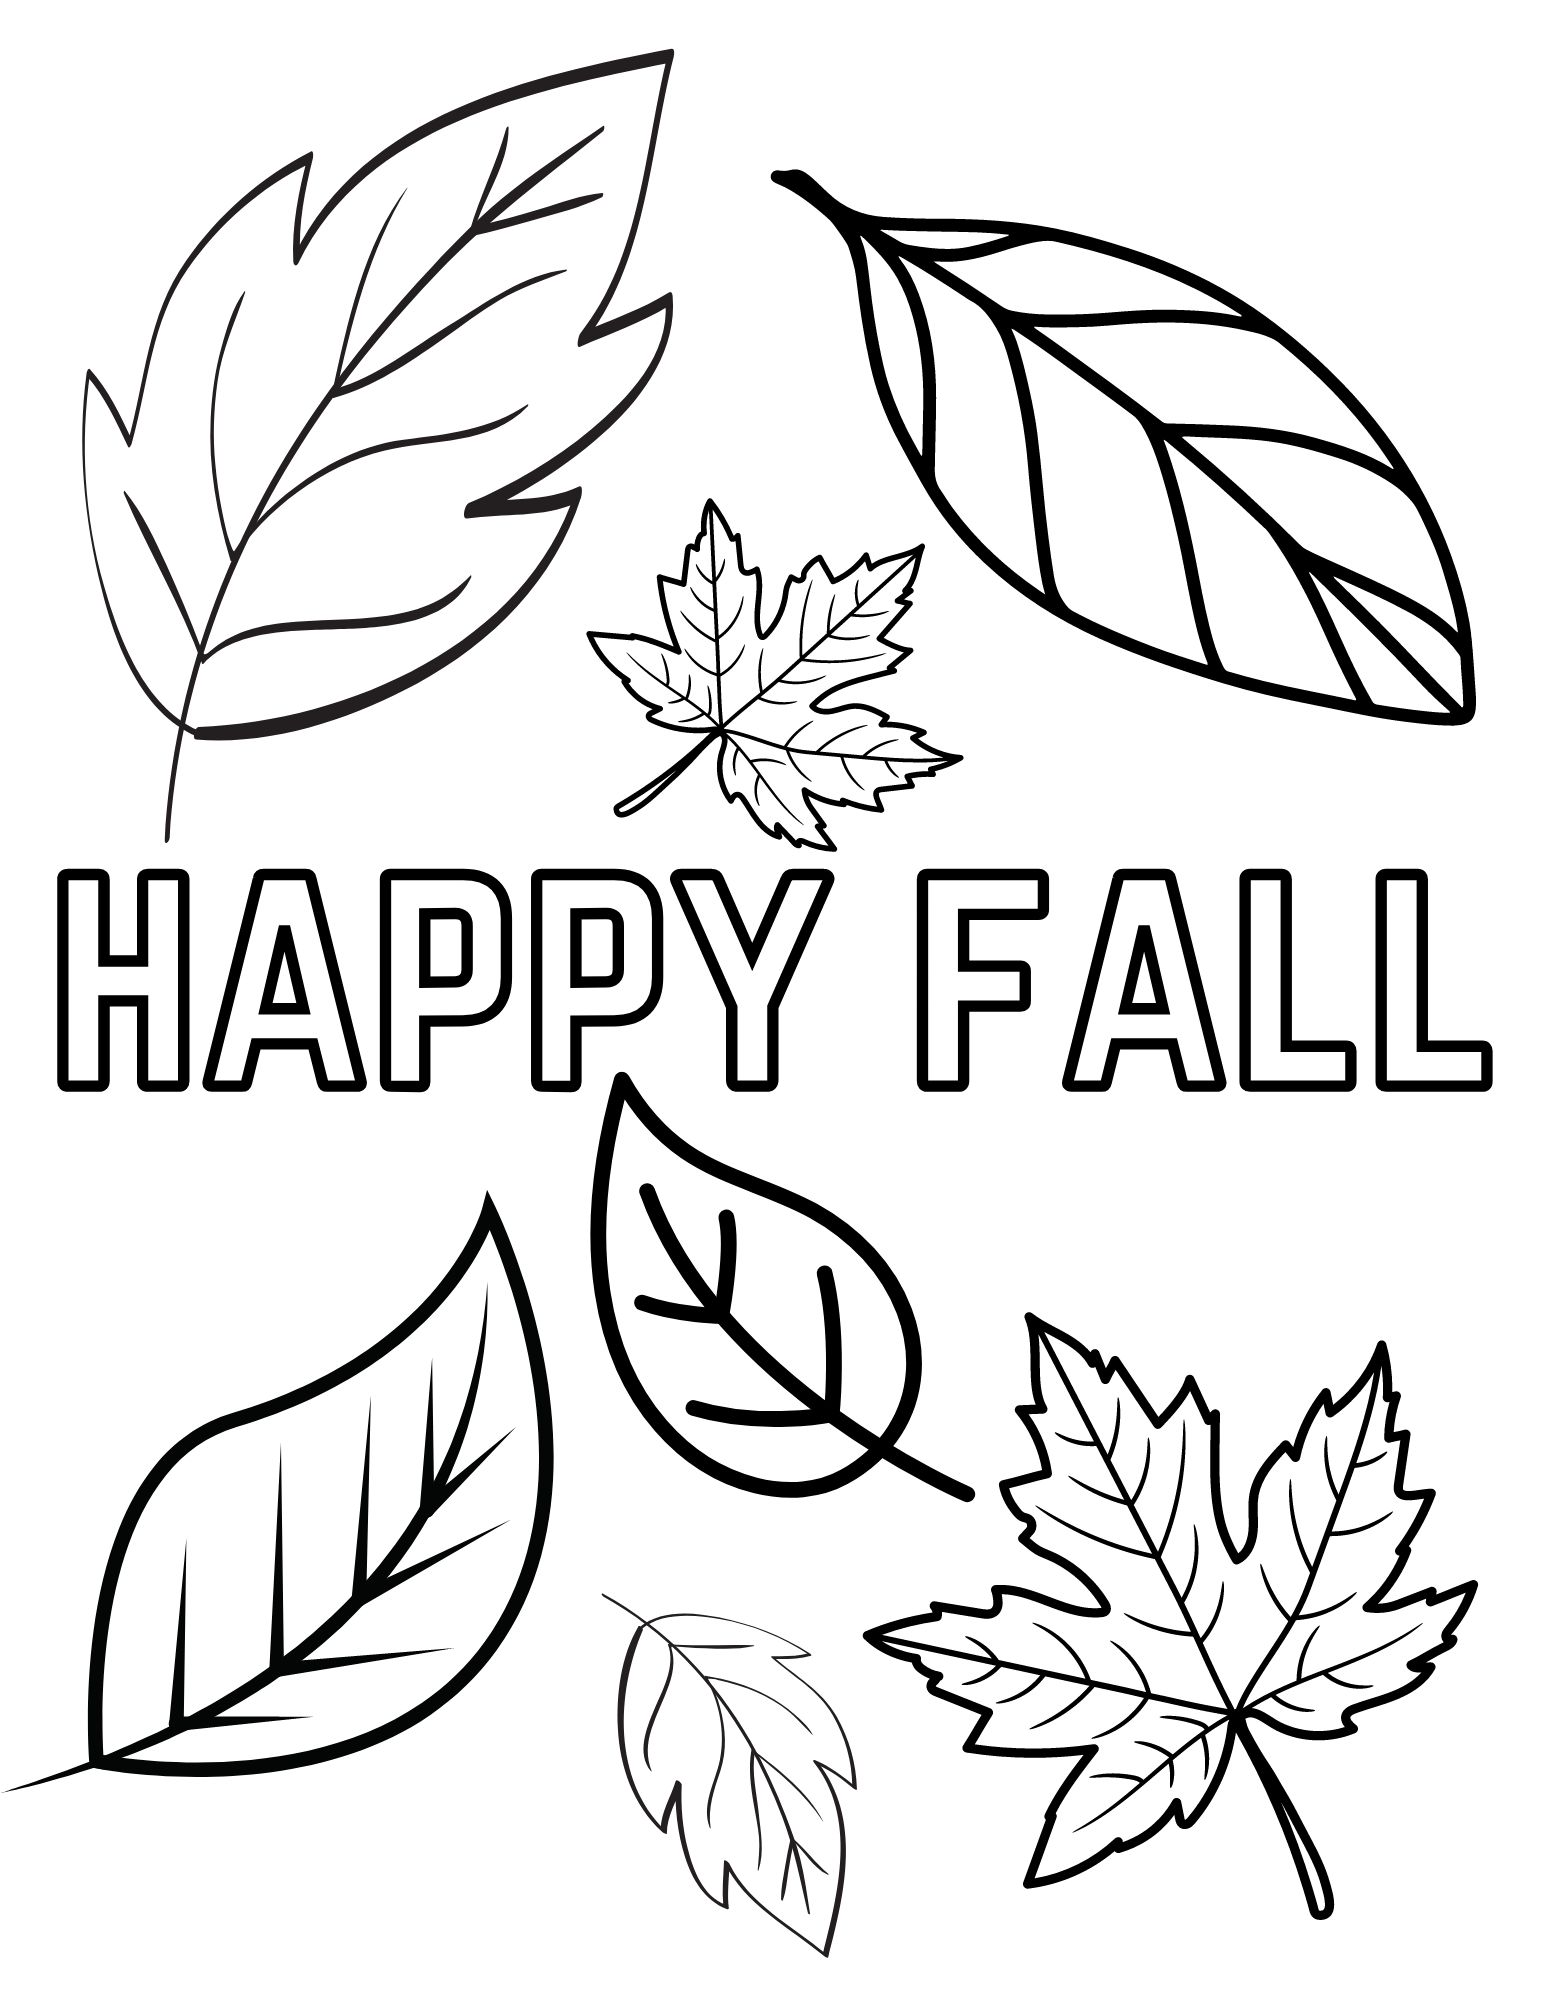 Get Your Kids Excited About Nature with Our Leaf Coloring Pages